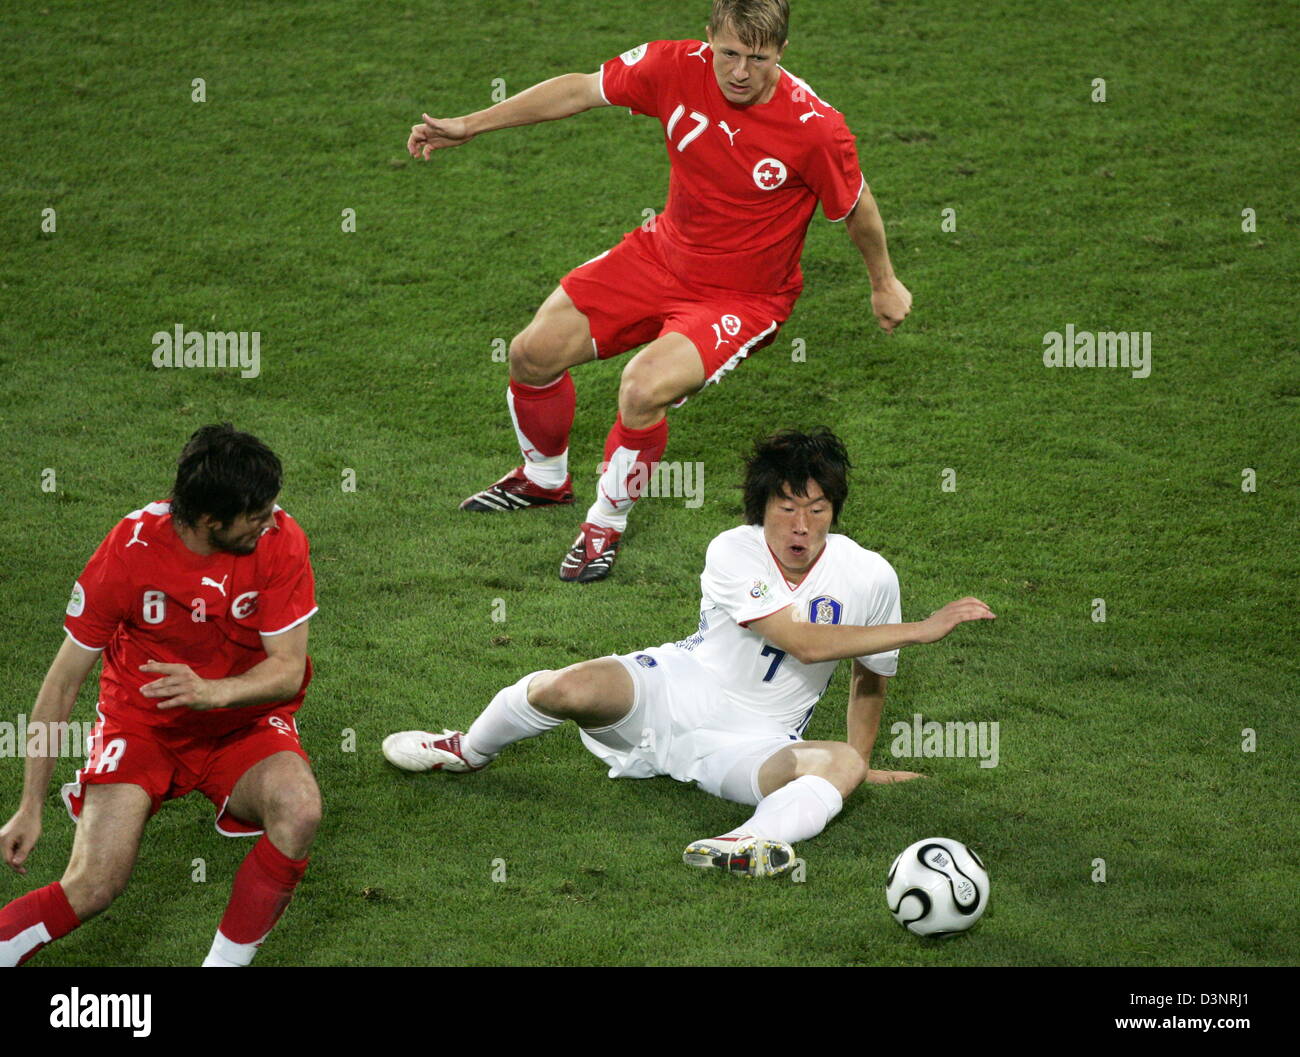 Swiss internationals Raphael Wicky (L) and Christoph Spycher concentrate on Ji Sung Park (bottom) from South Korea during the 2006 FIFA World Cup group G match of Switzerland vs South Korea in Hanover, Germany, Friday, 23 June 2006. DPA/RAINER JENSEN +++ Mobile Services OUT +++ Please also refer to FIFA's Terms and Conditions. +++(c) dpa - Bildfunk+++ Stock Photo